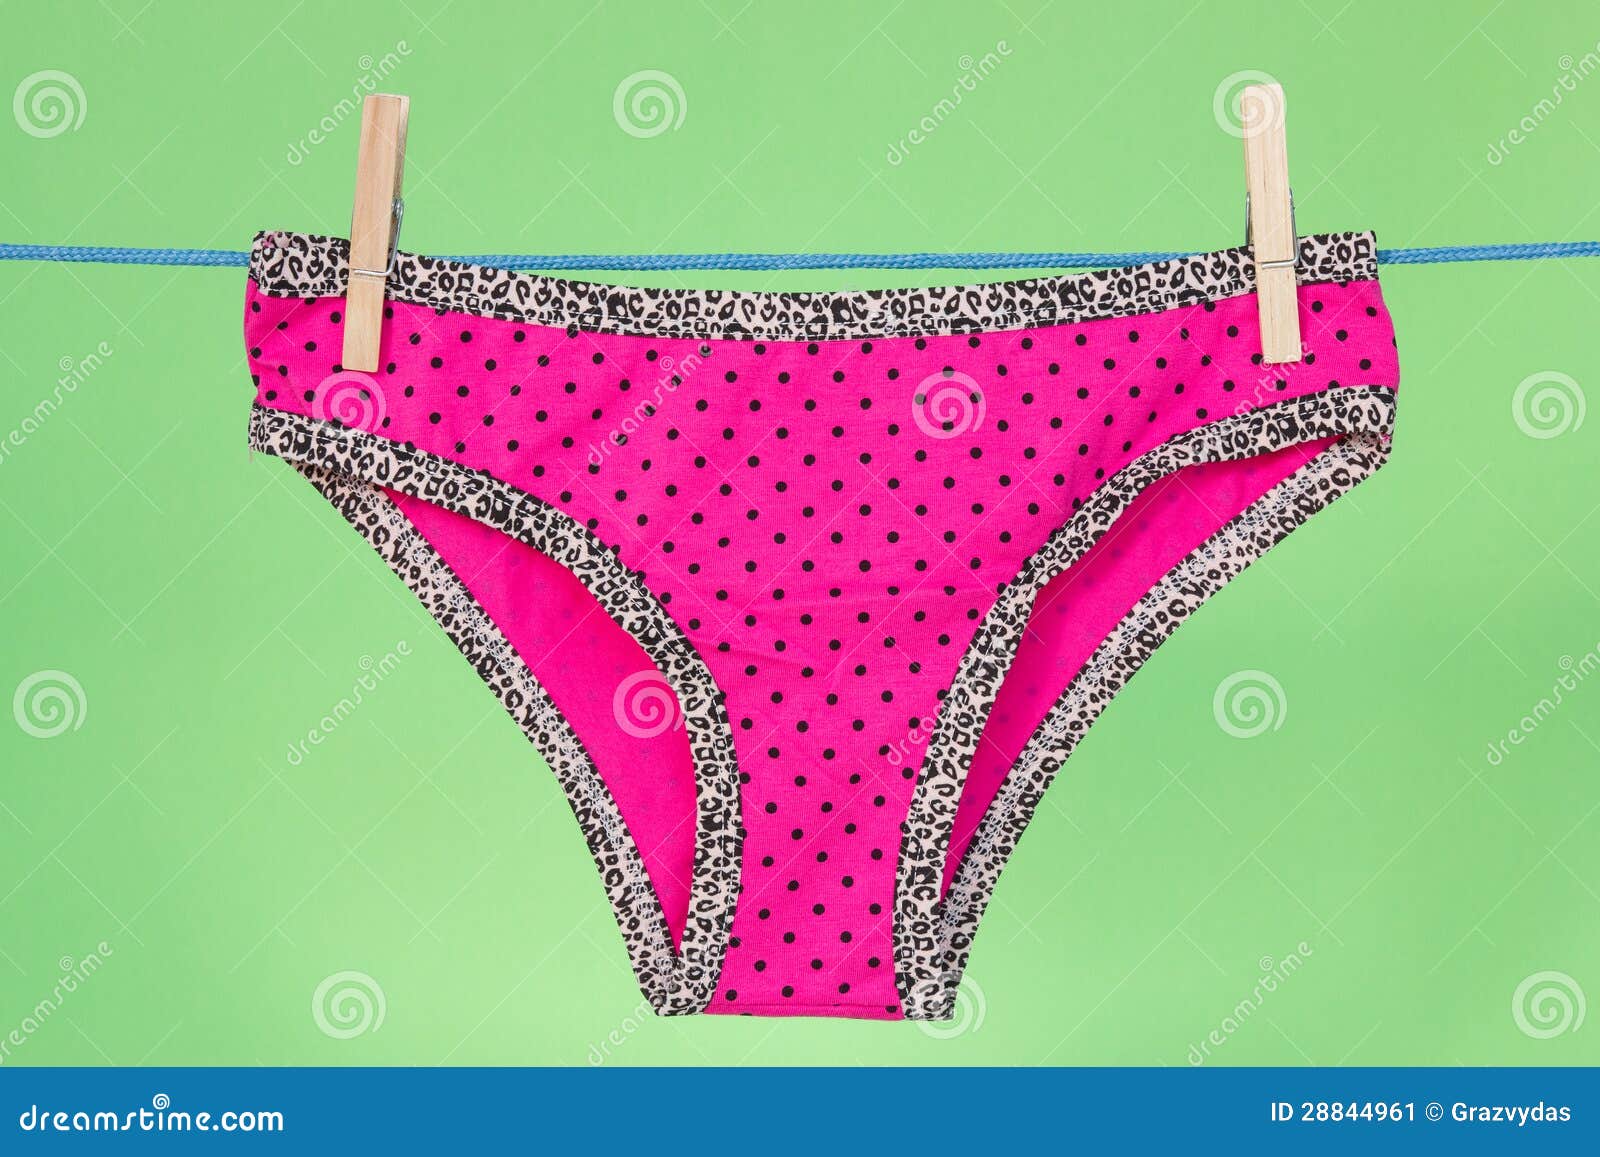 Pink Panties On The Green Background Stock Image Image Of Clothespin